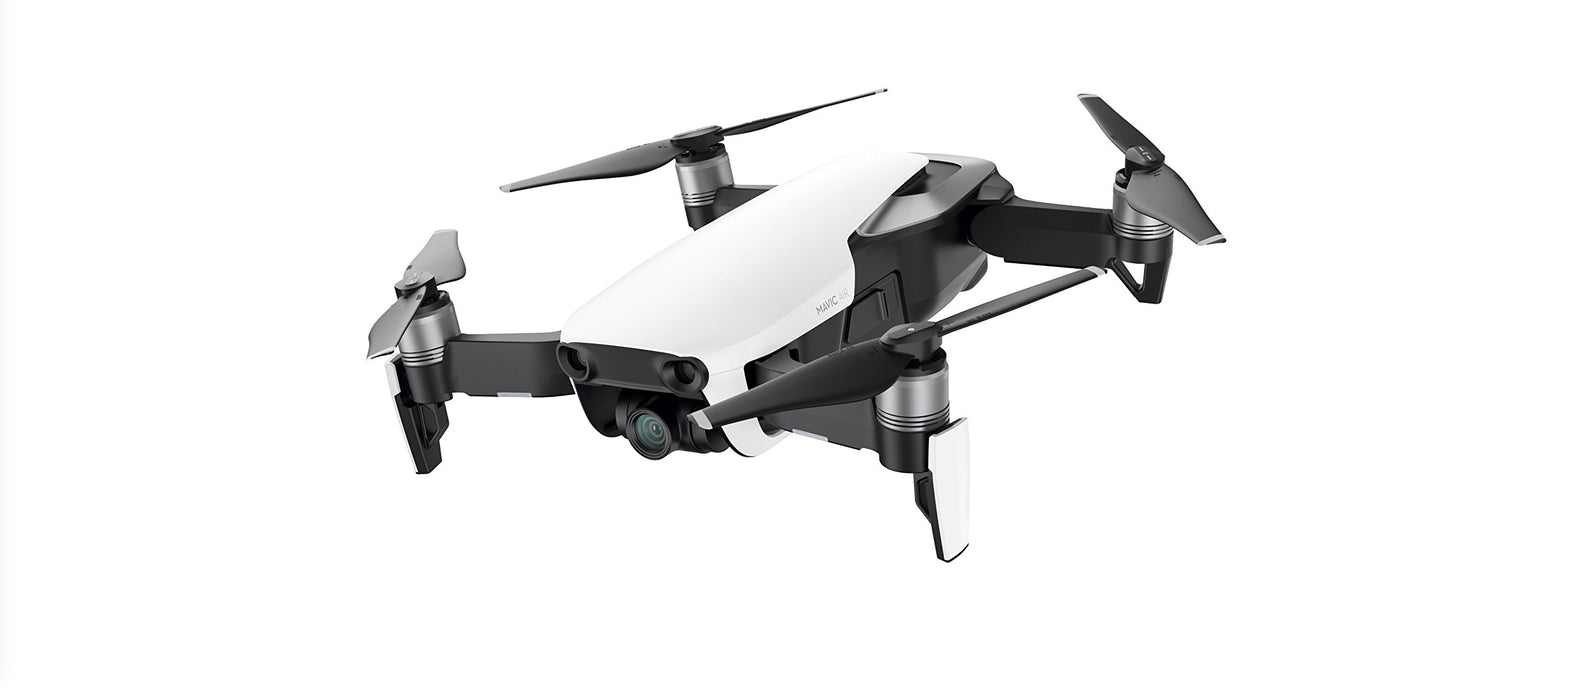 DJI Mavic Air Drone Fly More Combo - UK Version With UK PSU, 3-Axis Gimbal and 4K Camera, 21-Minute Flight Time, 32 MP Sphere Panoramas, Foldable and Portable, SmartCapture - Arctic White